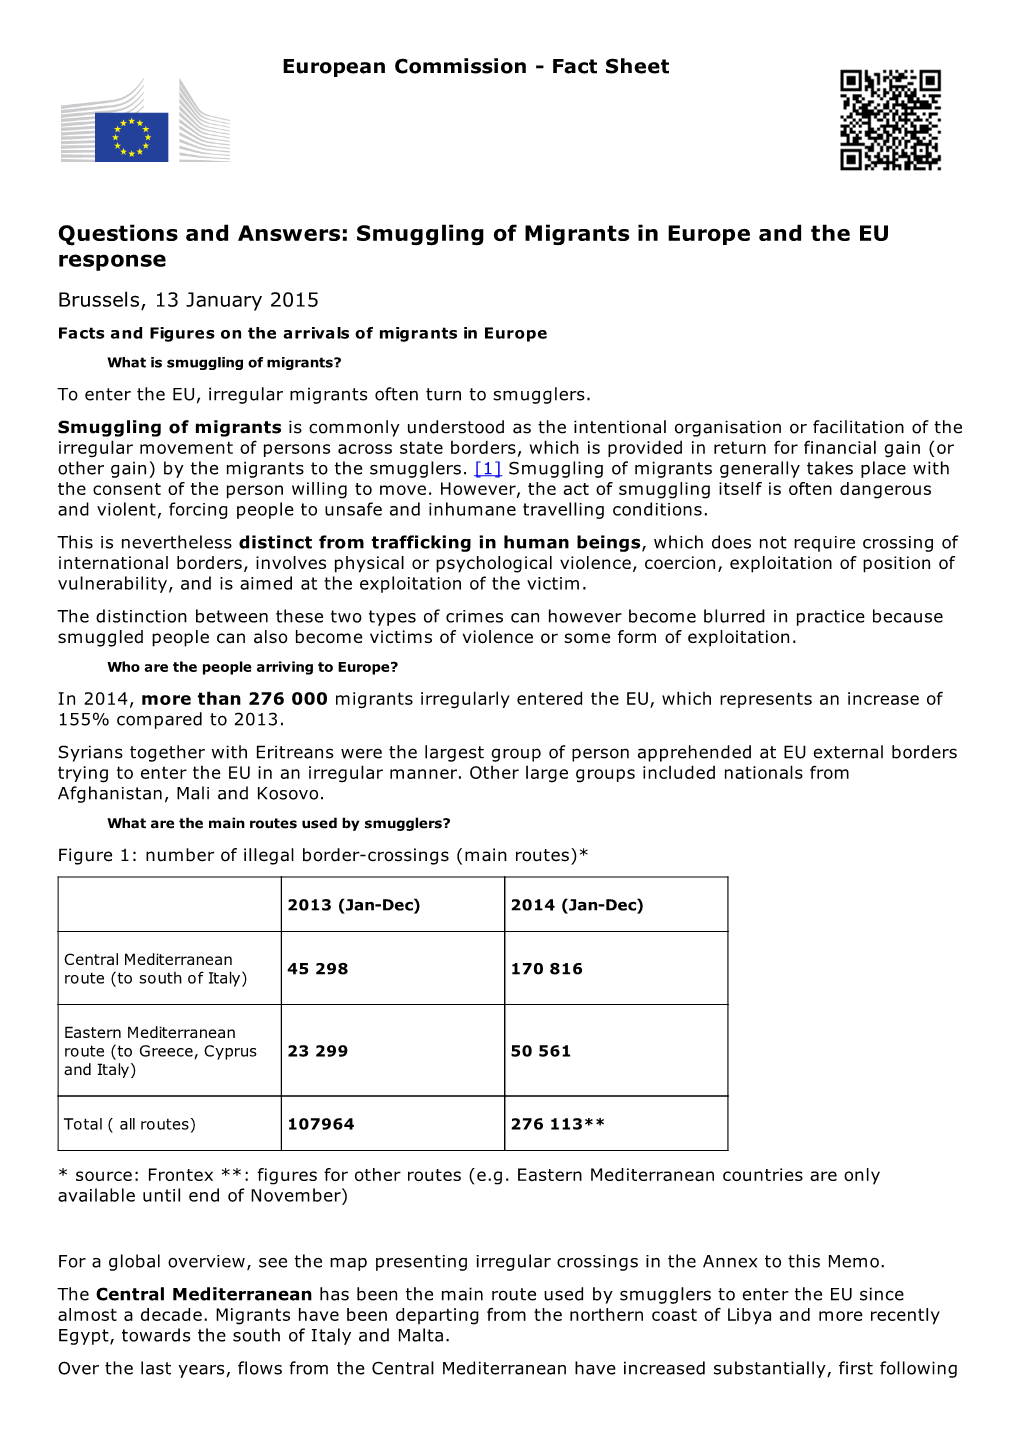 Smuggling of Migrants in Europe and the EU Response